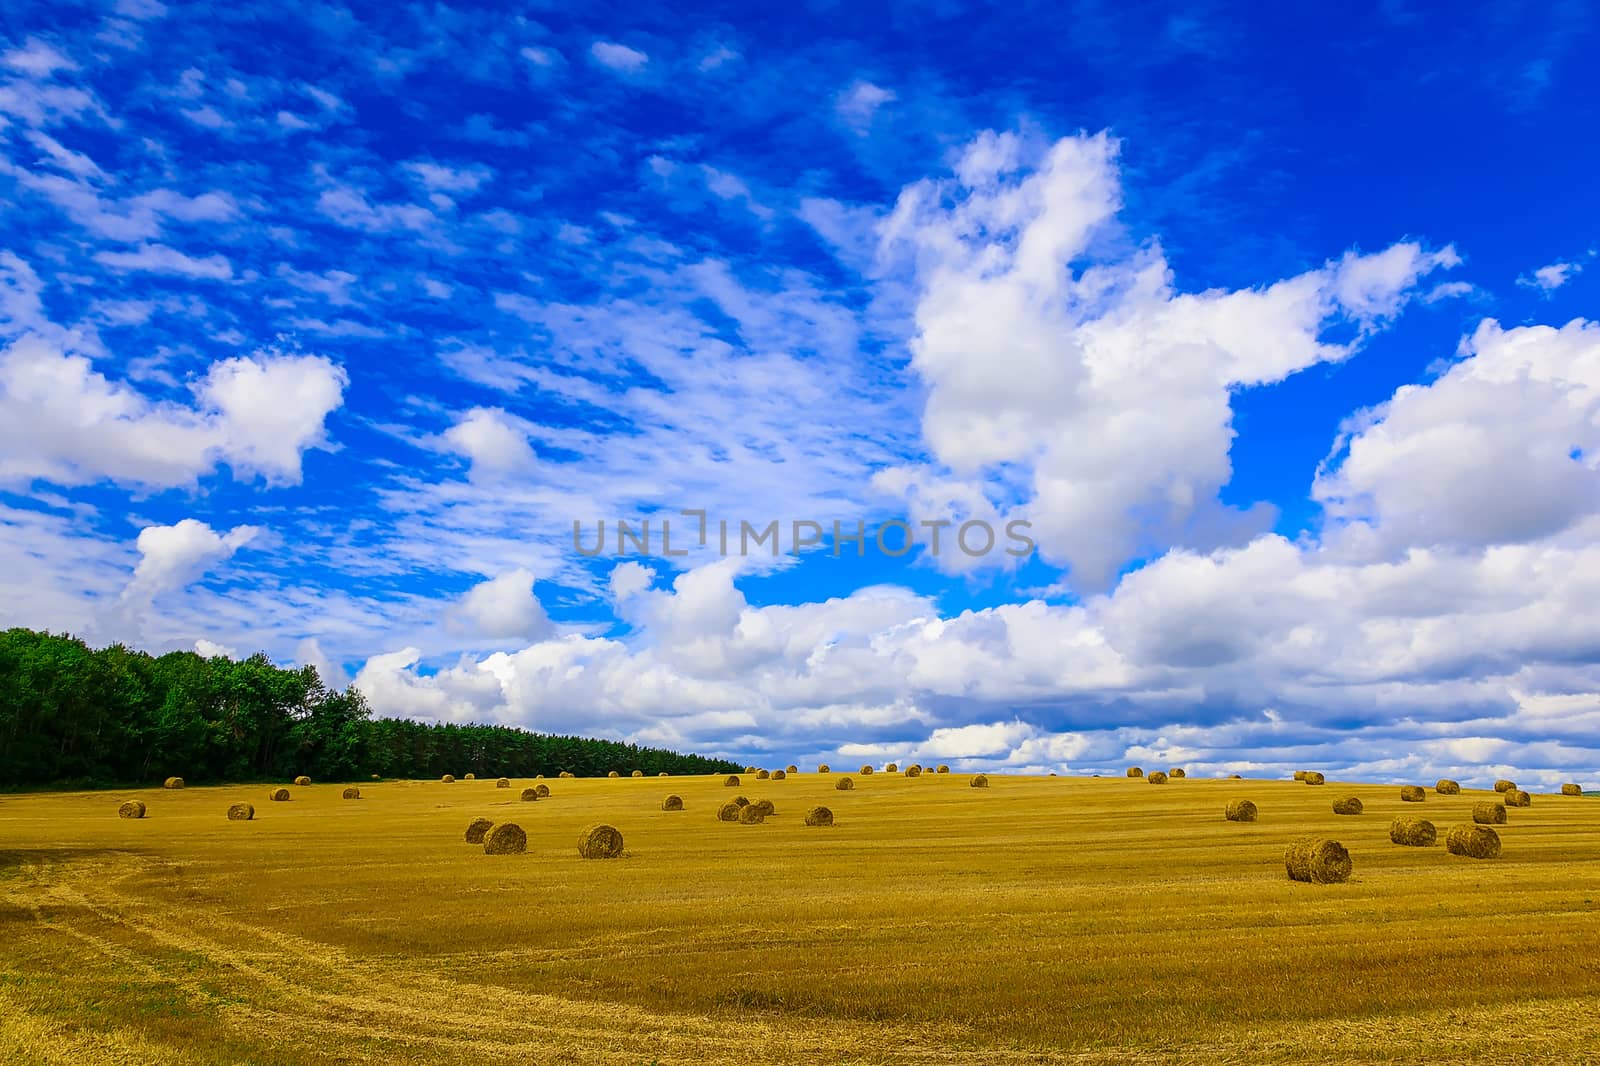 Round, Yellow Straw Bales in a Stubble Field at end of Summer at Day with Clouds after Harvest